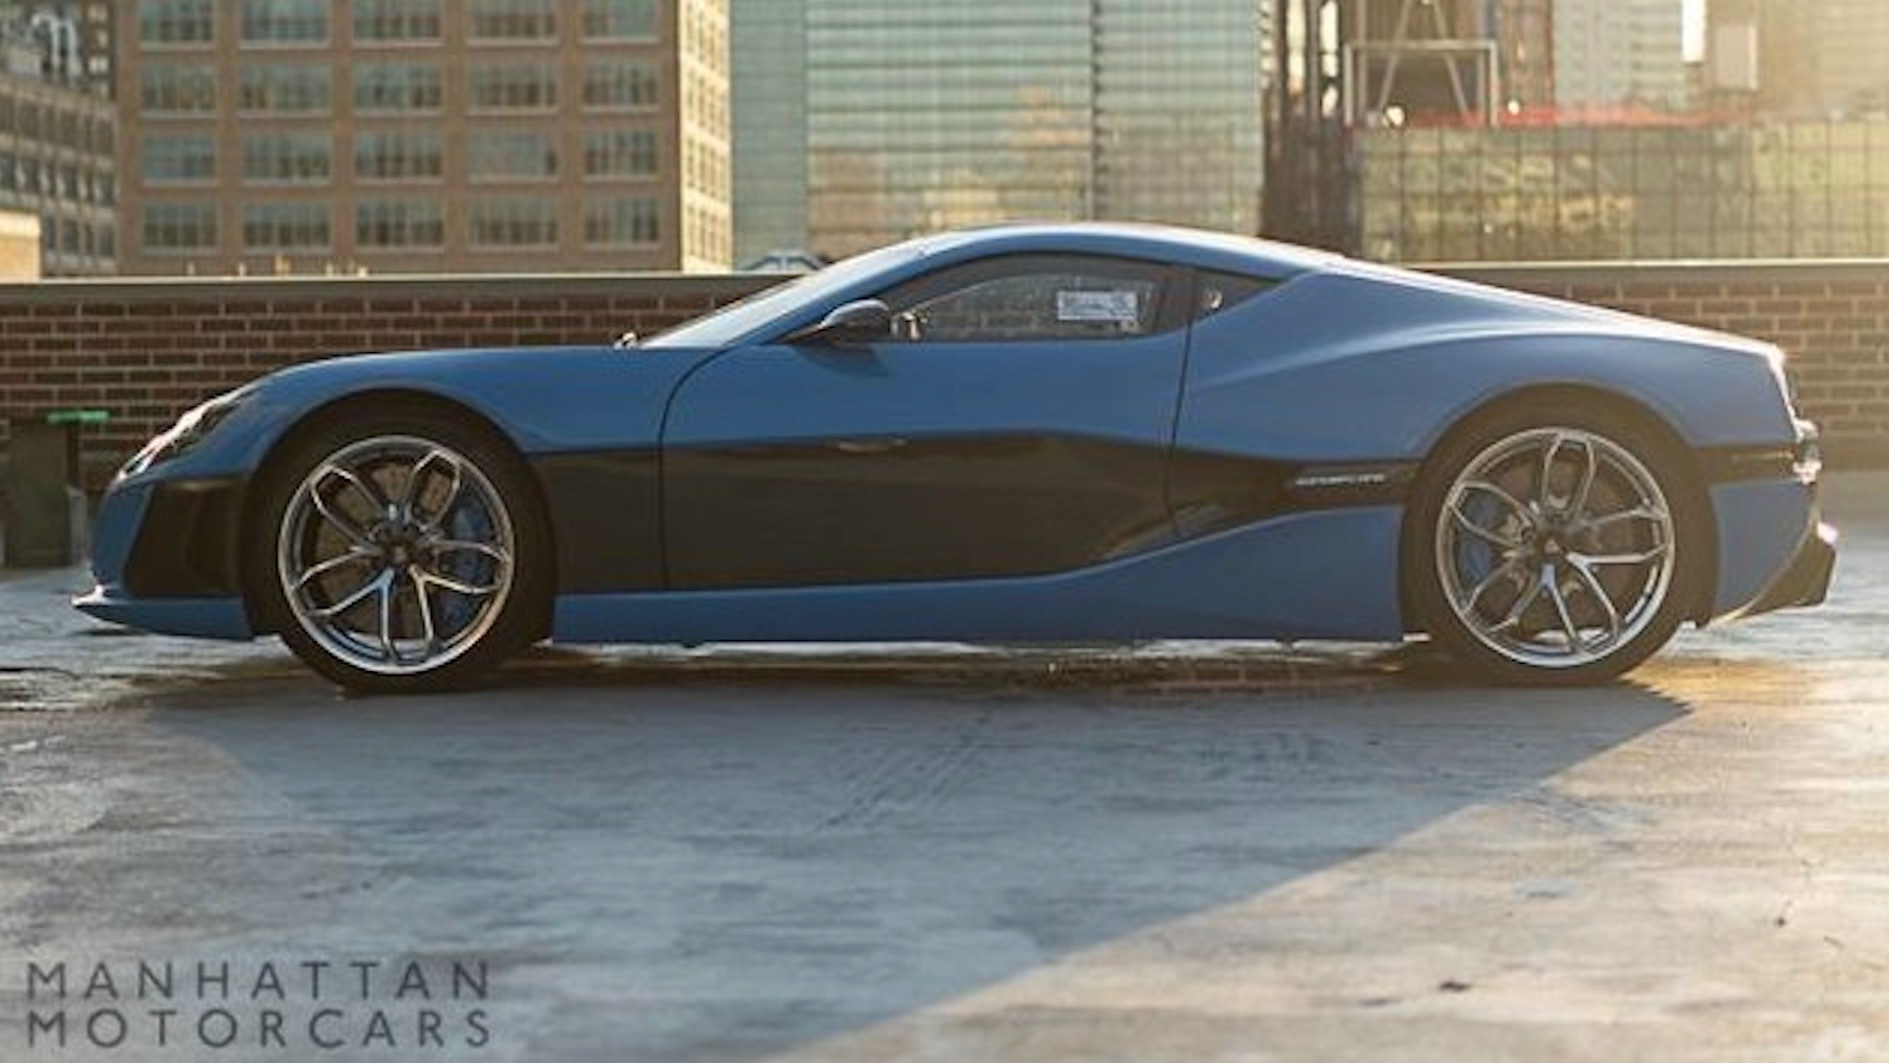 Rimac Concept_One for sale (Photo by Manhattan Motorcars)